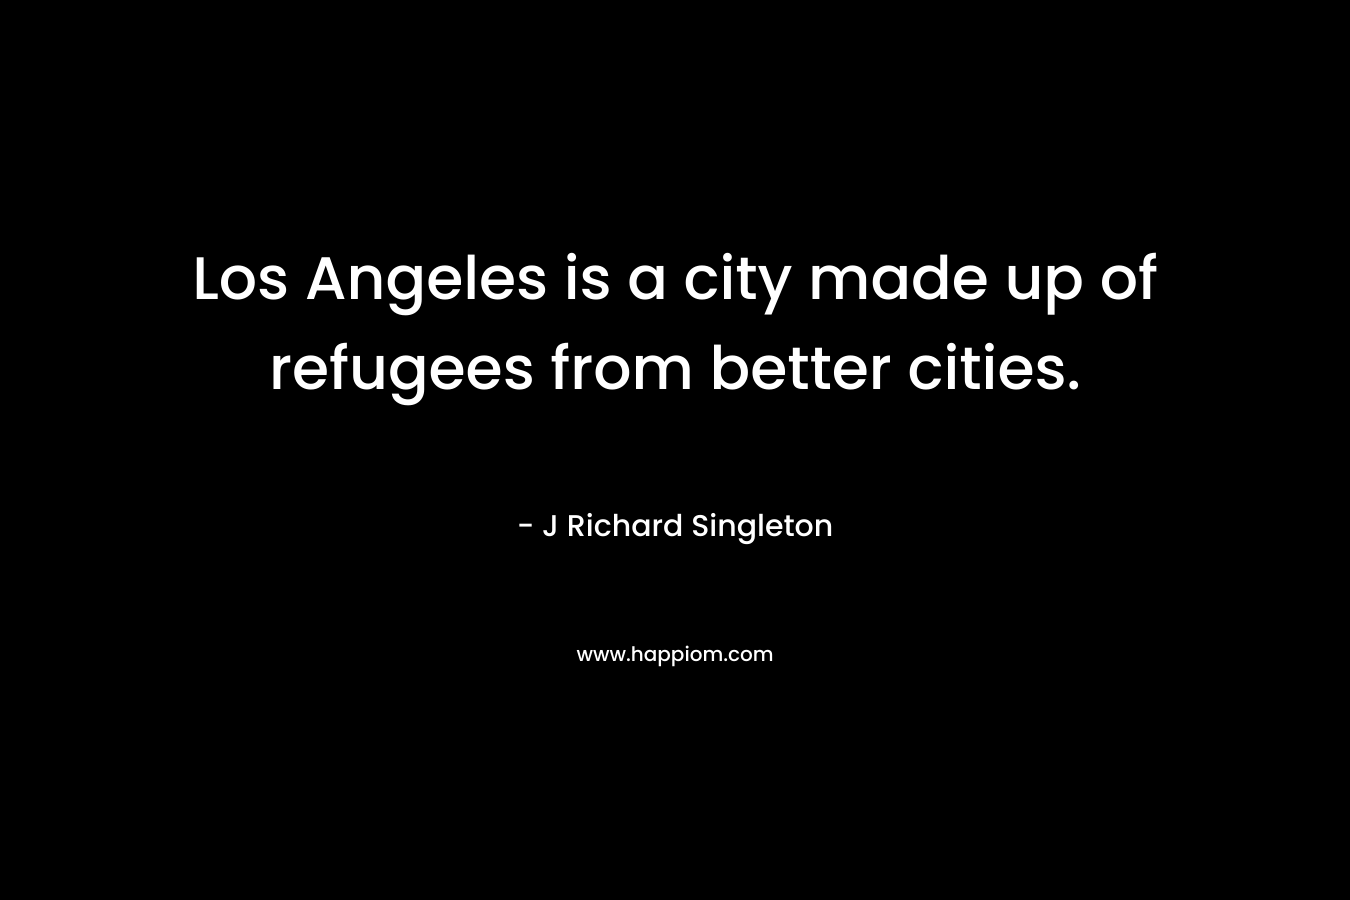 Los Angeles is a city made up of refugees from better cities. – J Richard Singleton